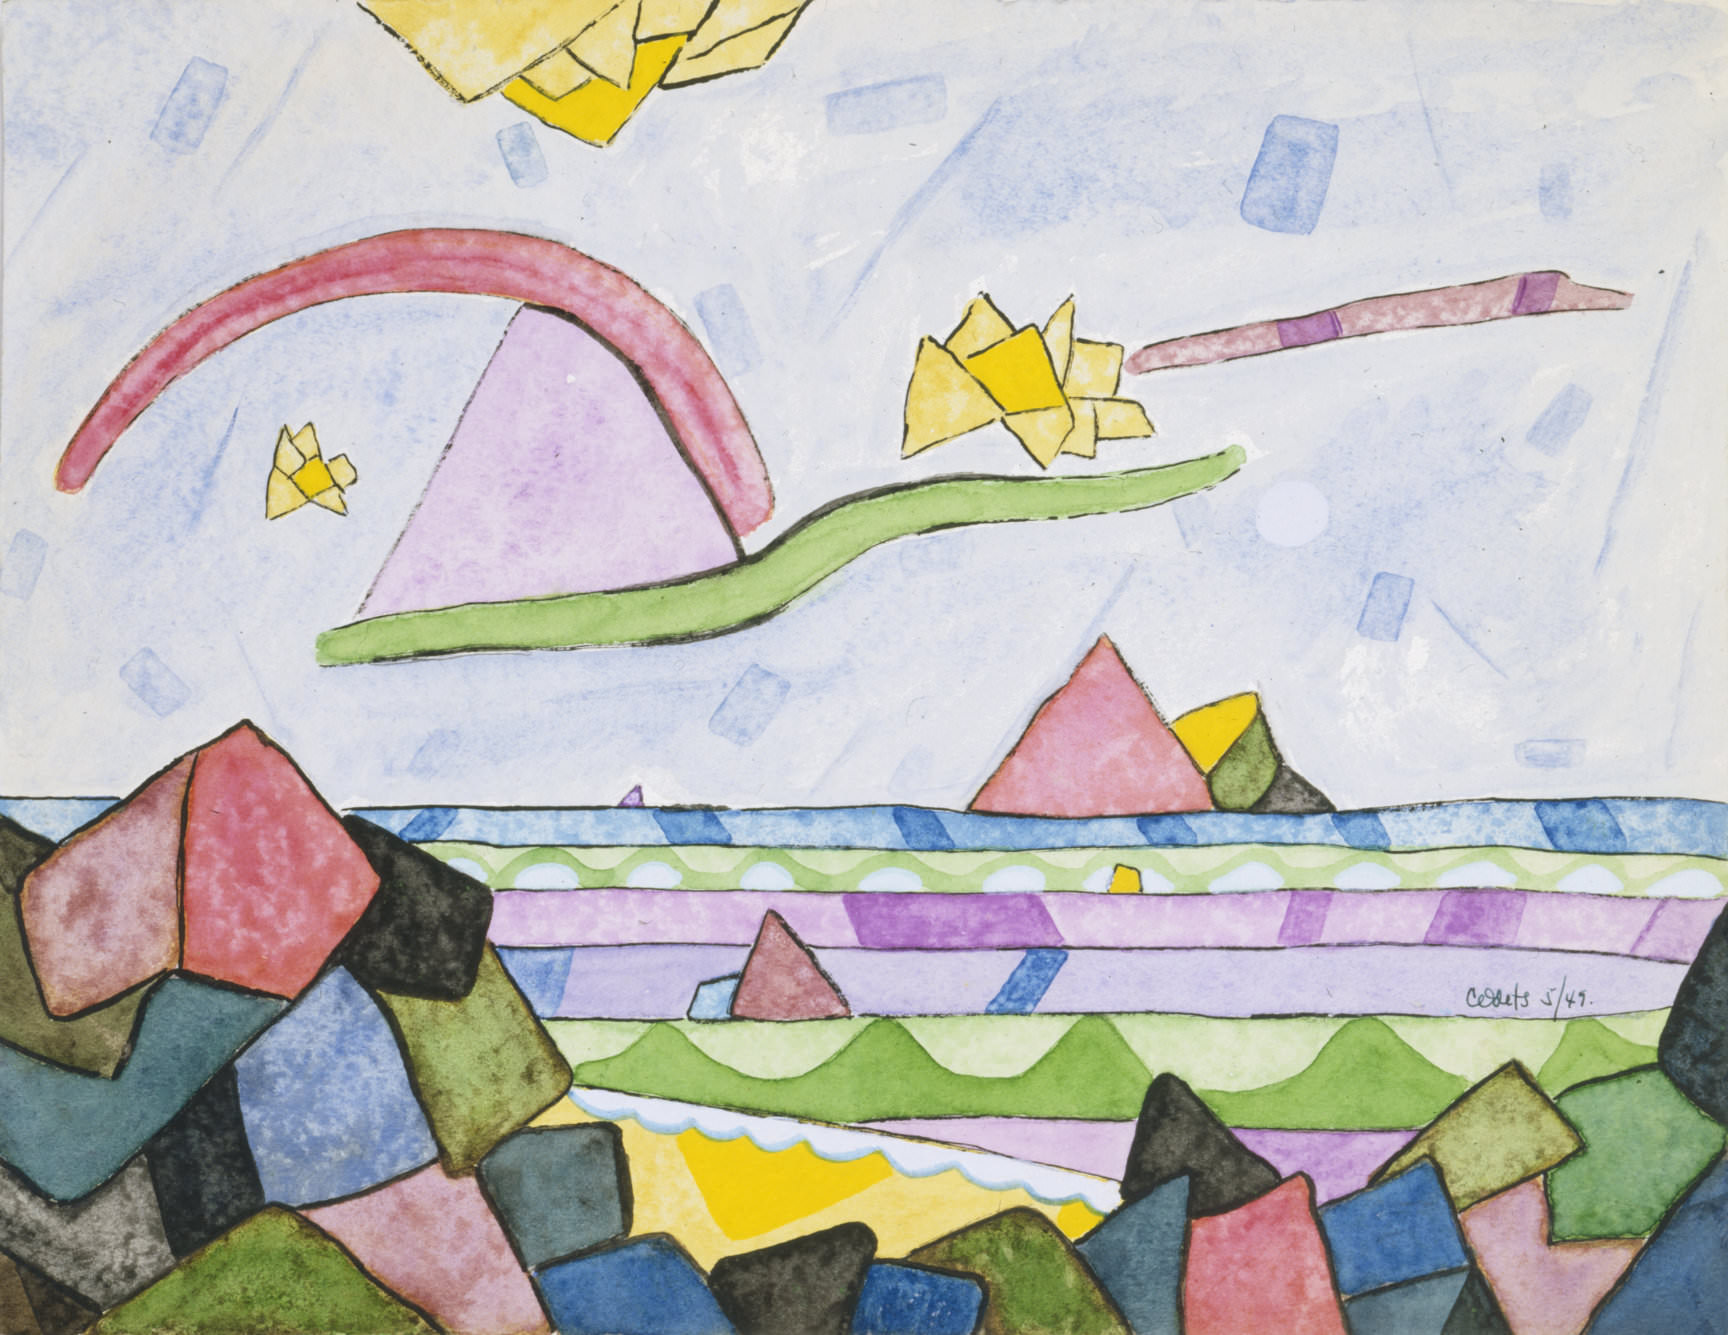  fig. 16 Clifforfd Odets,  Sea, Rocks, and Clouds , 1949, watercolor, ink and gouache on paper, 25.4 x 32.7 cm, signed and dated, Courtesy of Michael Rosenfeld Gallery LLC, New York, NY, © Walt Odets 